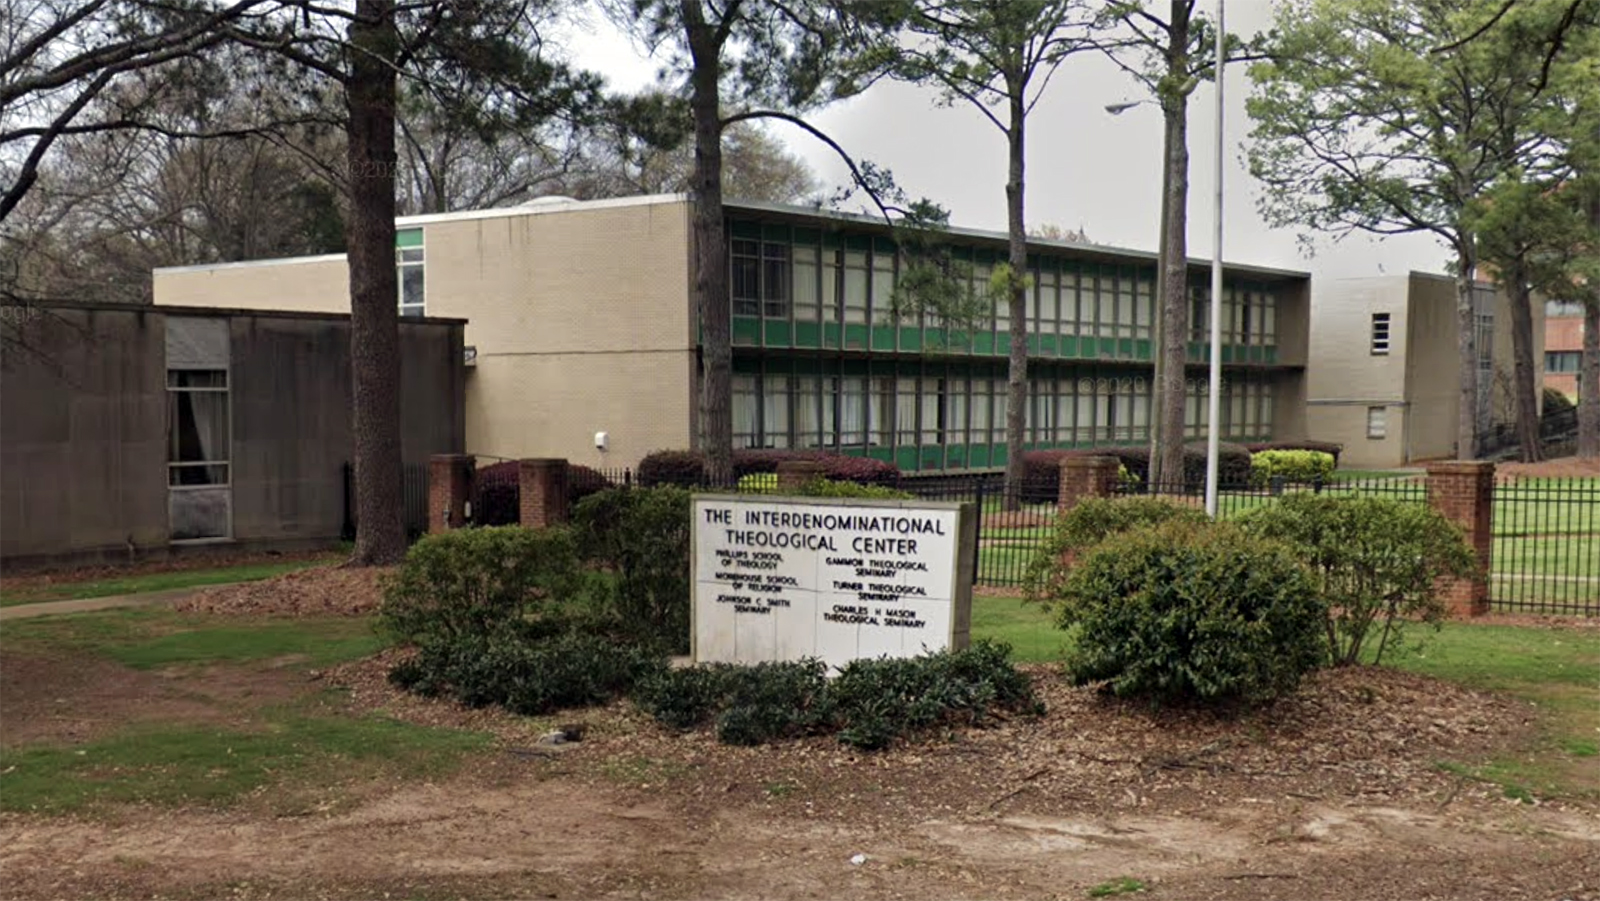 The Interdenominational Theological Center campus in Atlanta. (Image courtesy Google Maps)